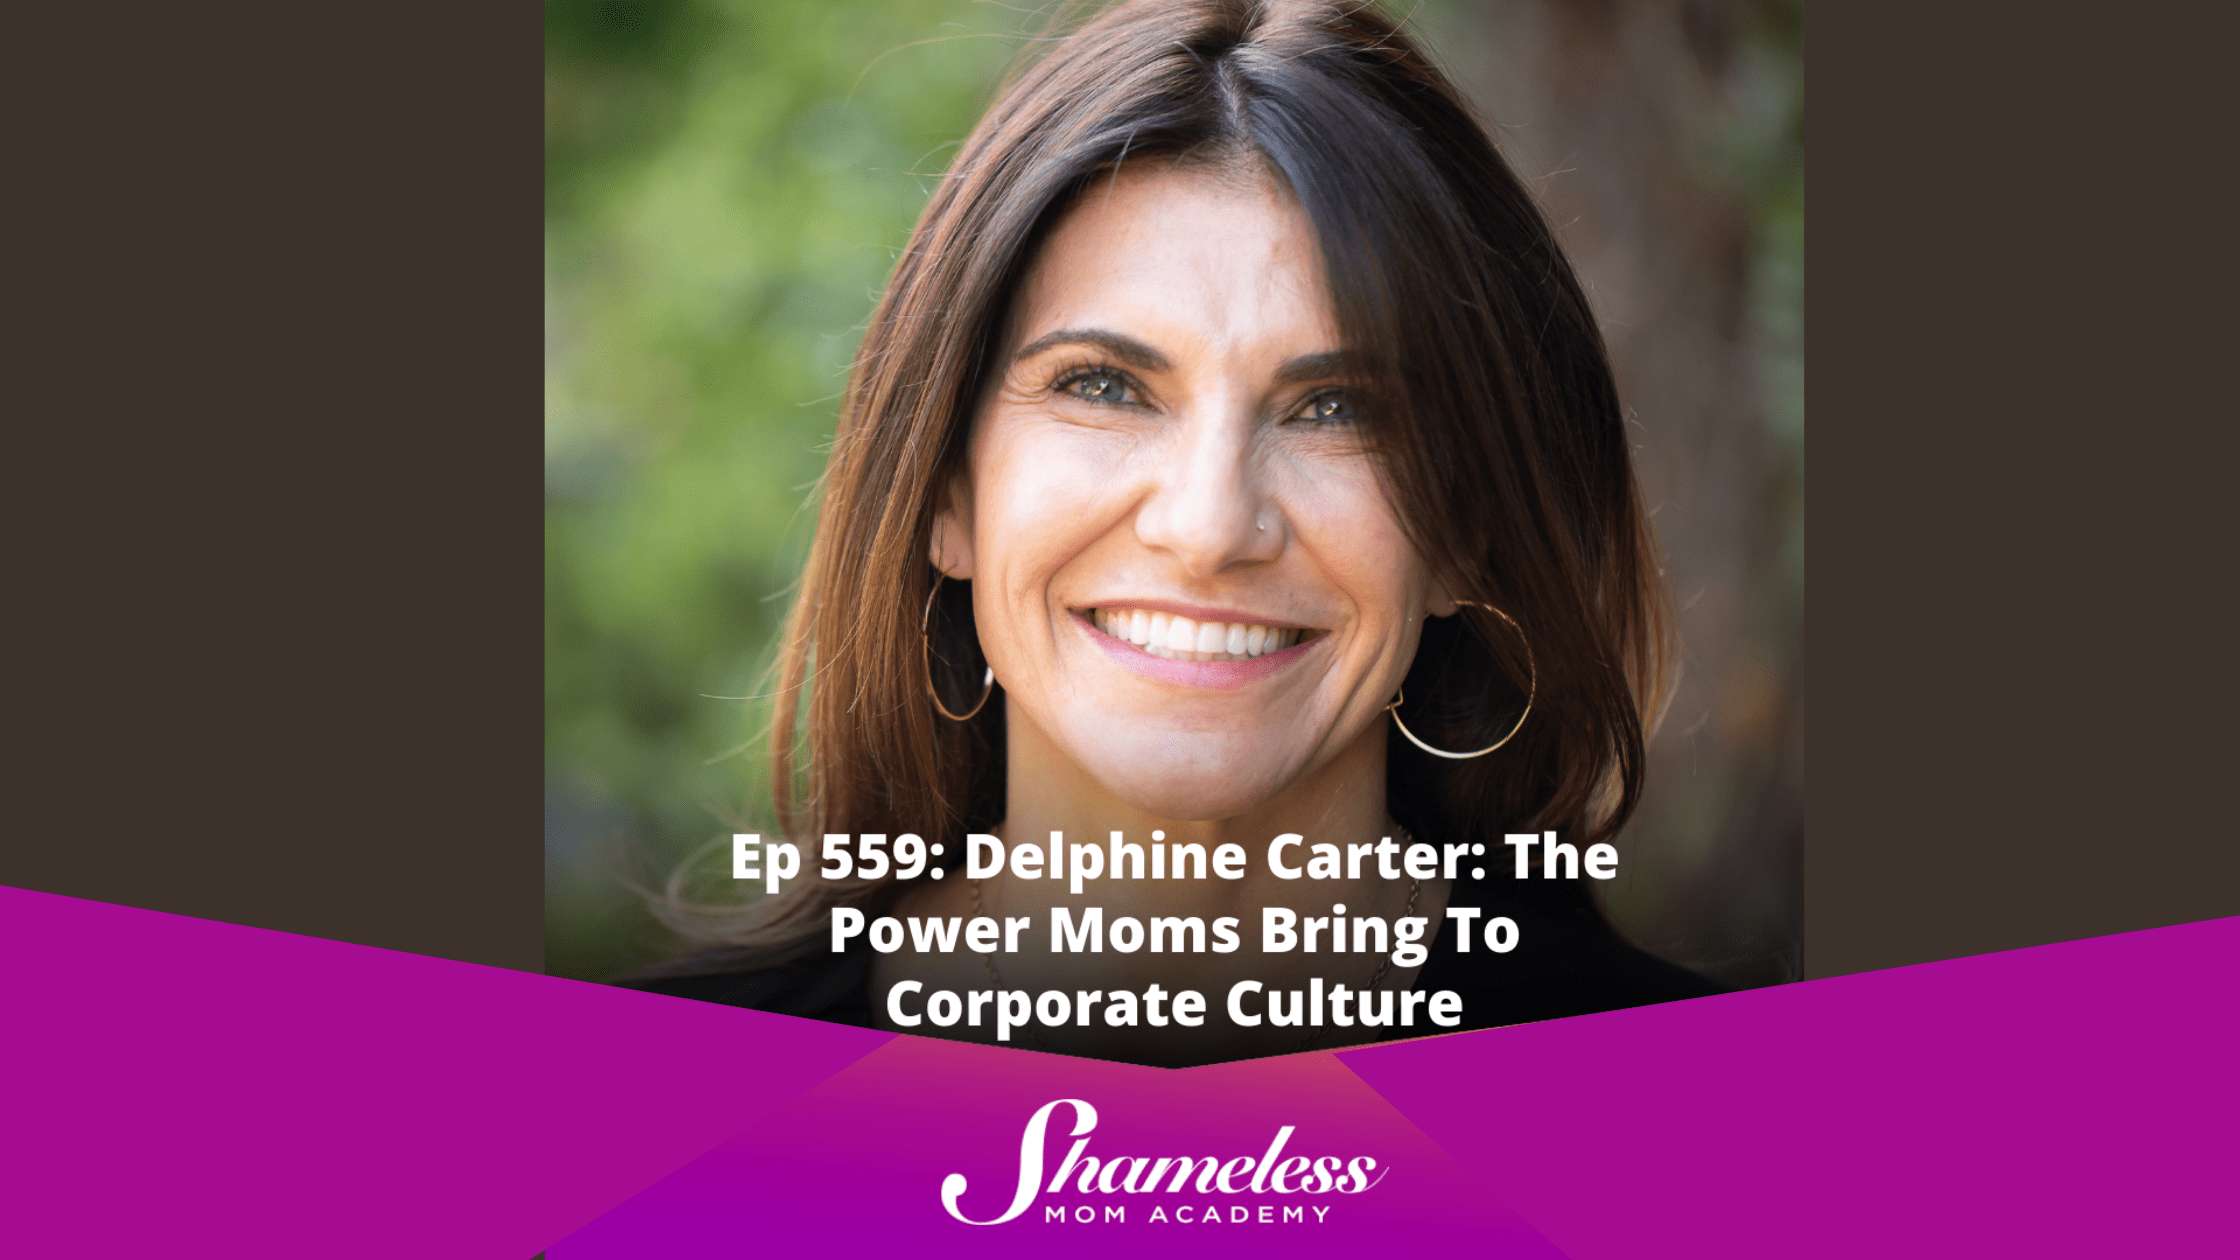 Shameless Mom Academy Podcast Promo Template with Delphine Carter photo: The Power Moms Bring to Corporate Culture